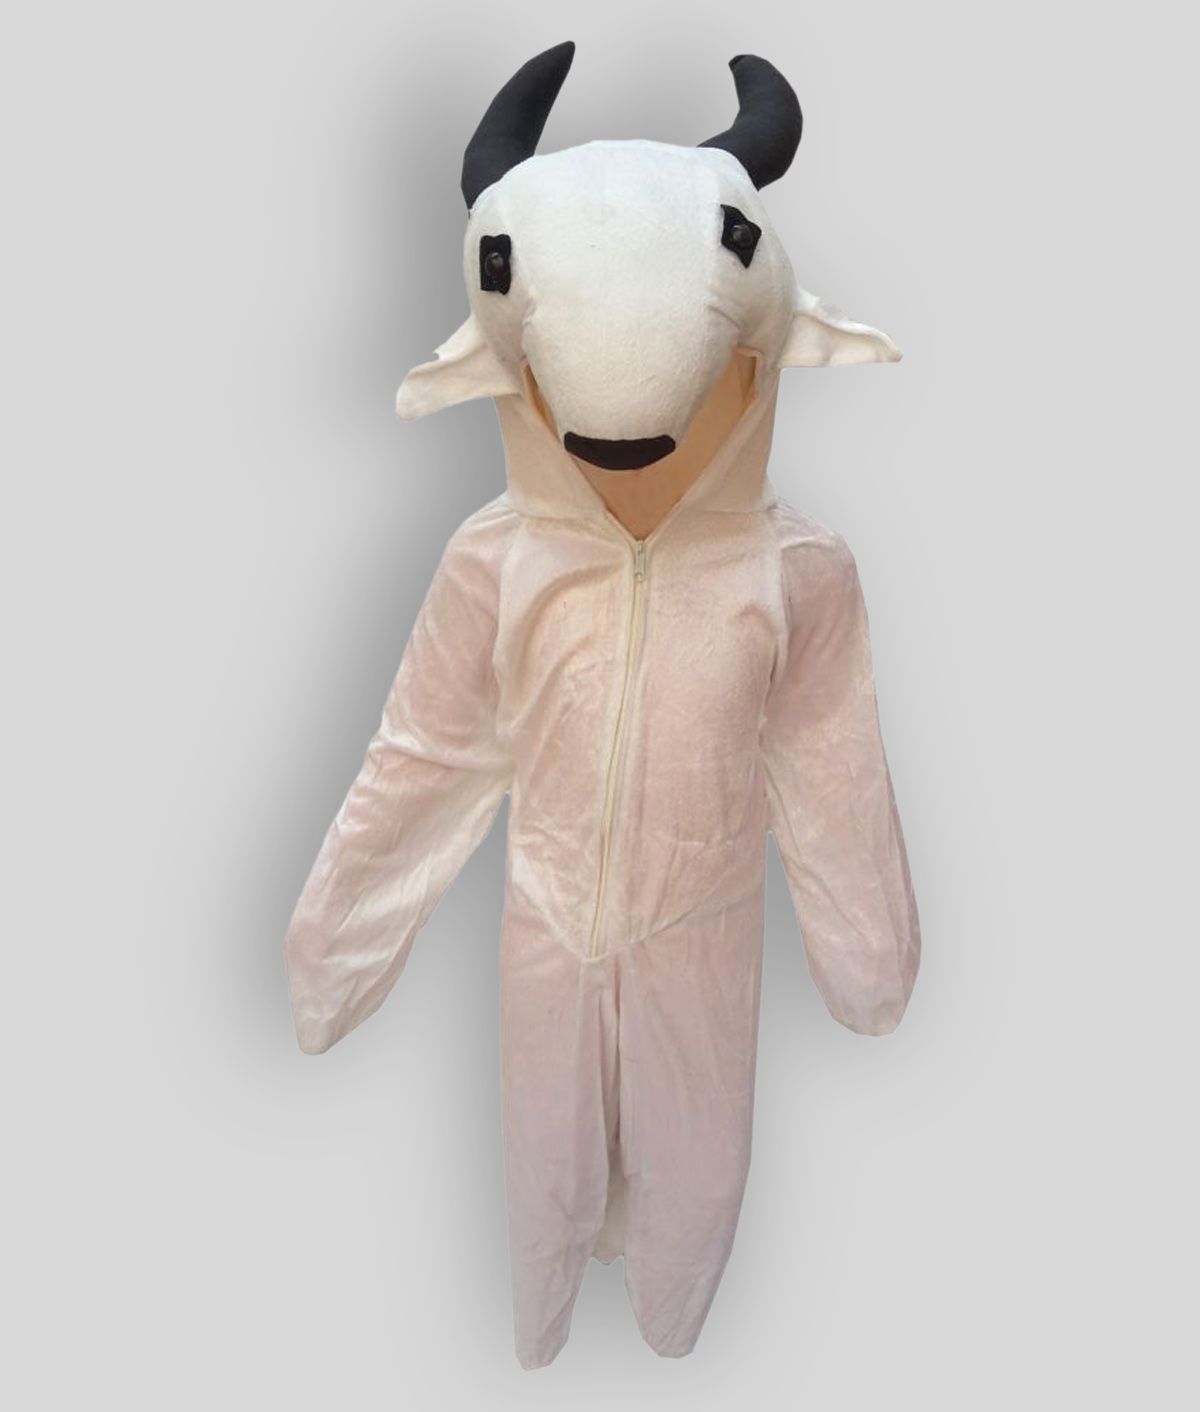     			Kaku Fancy Dresses Cow Farm Animal Costume For Kids Annual function/Theme Party/Competition/Stage Shows Dress